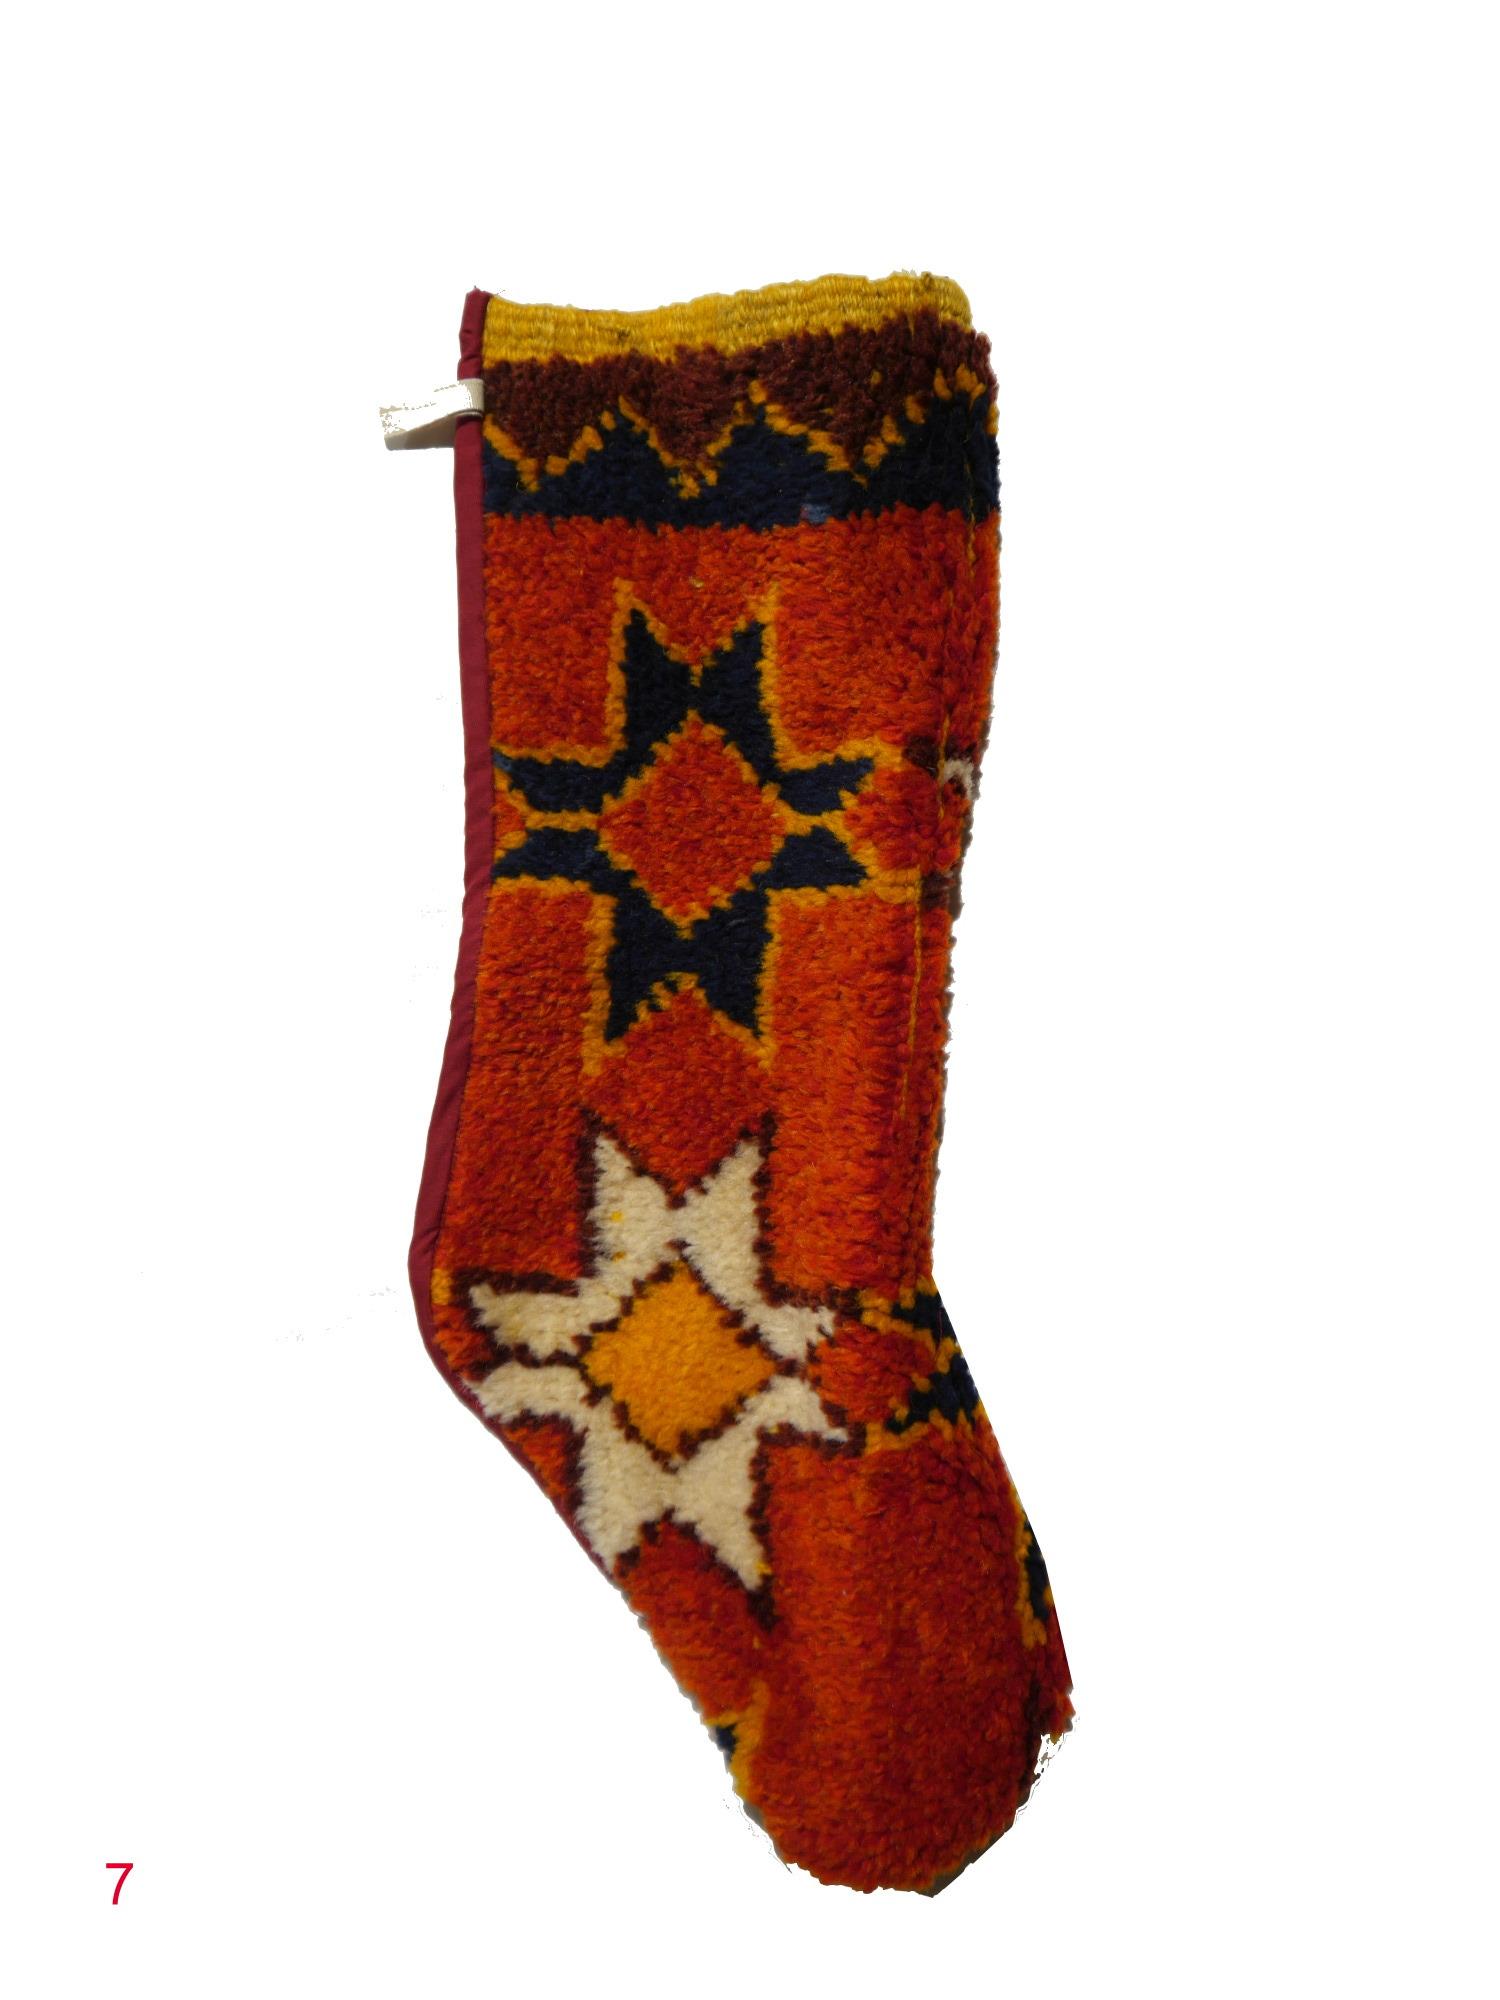 One of a kind Christmas stockings.
These Christmas stocking were made using a vintage Moroccan Berber rug. The front is 100% pure luxurious hand-spun wool, the backing is cotton. Some of the stockings have orange backing, some have burgundy